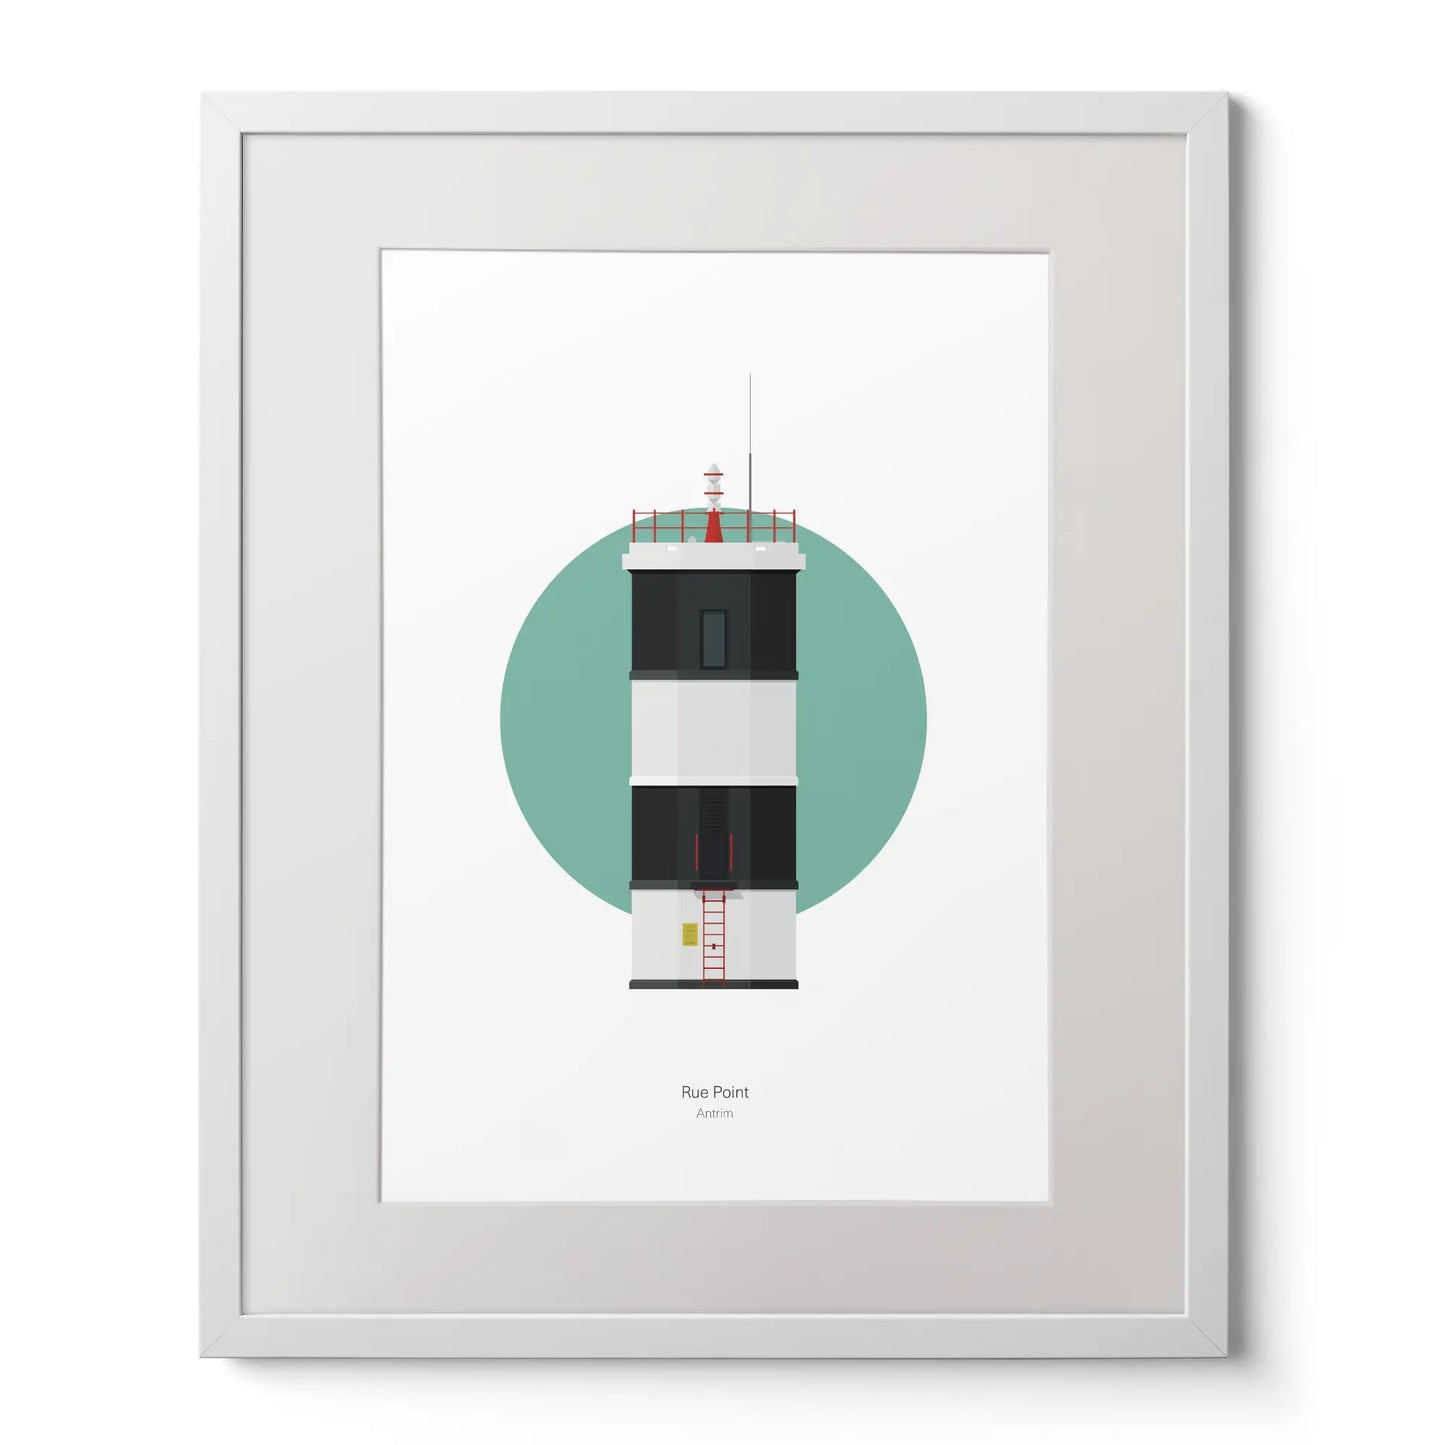 Contemporary art print of Rue Point lighthouse on a white background inside light blue square,  in a white frame measuring 40x50cm.